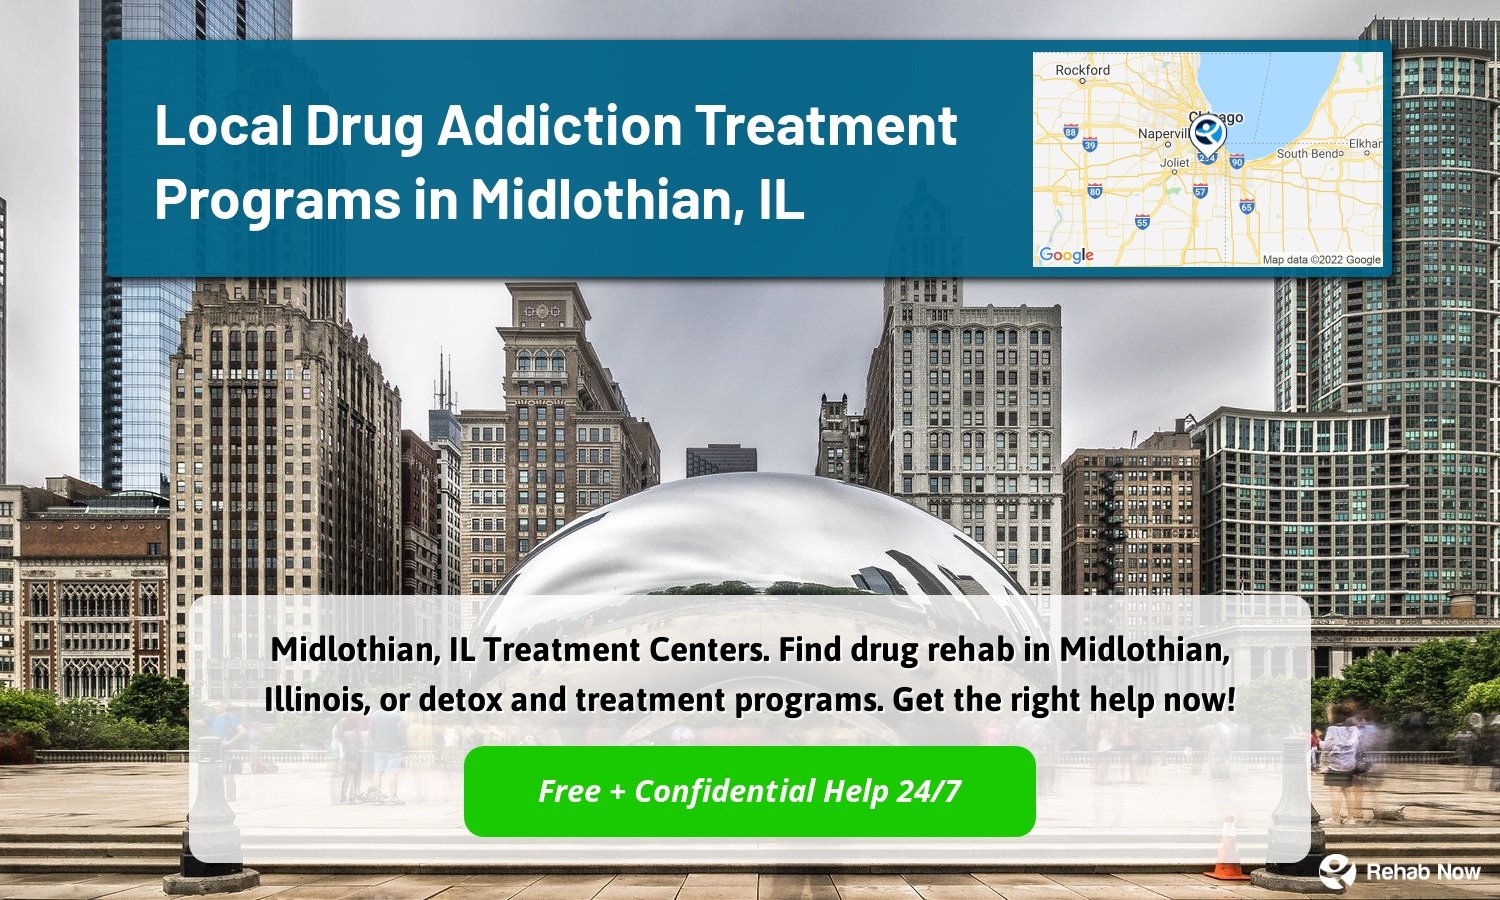 Midlothian, IL Treatment Centers. Find drug rehab in Midlothian, Illinois, or detox and treatment programs. Get the right help now!